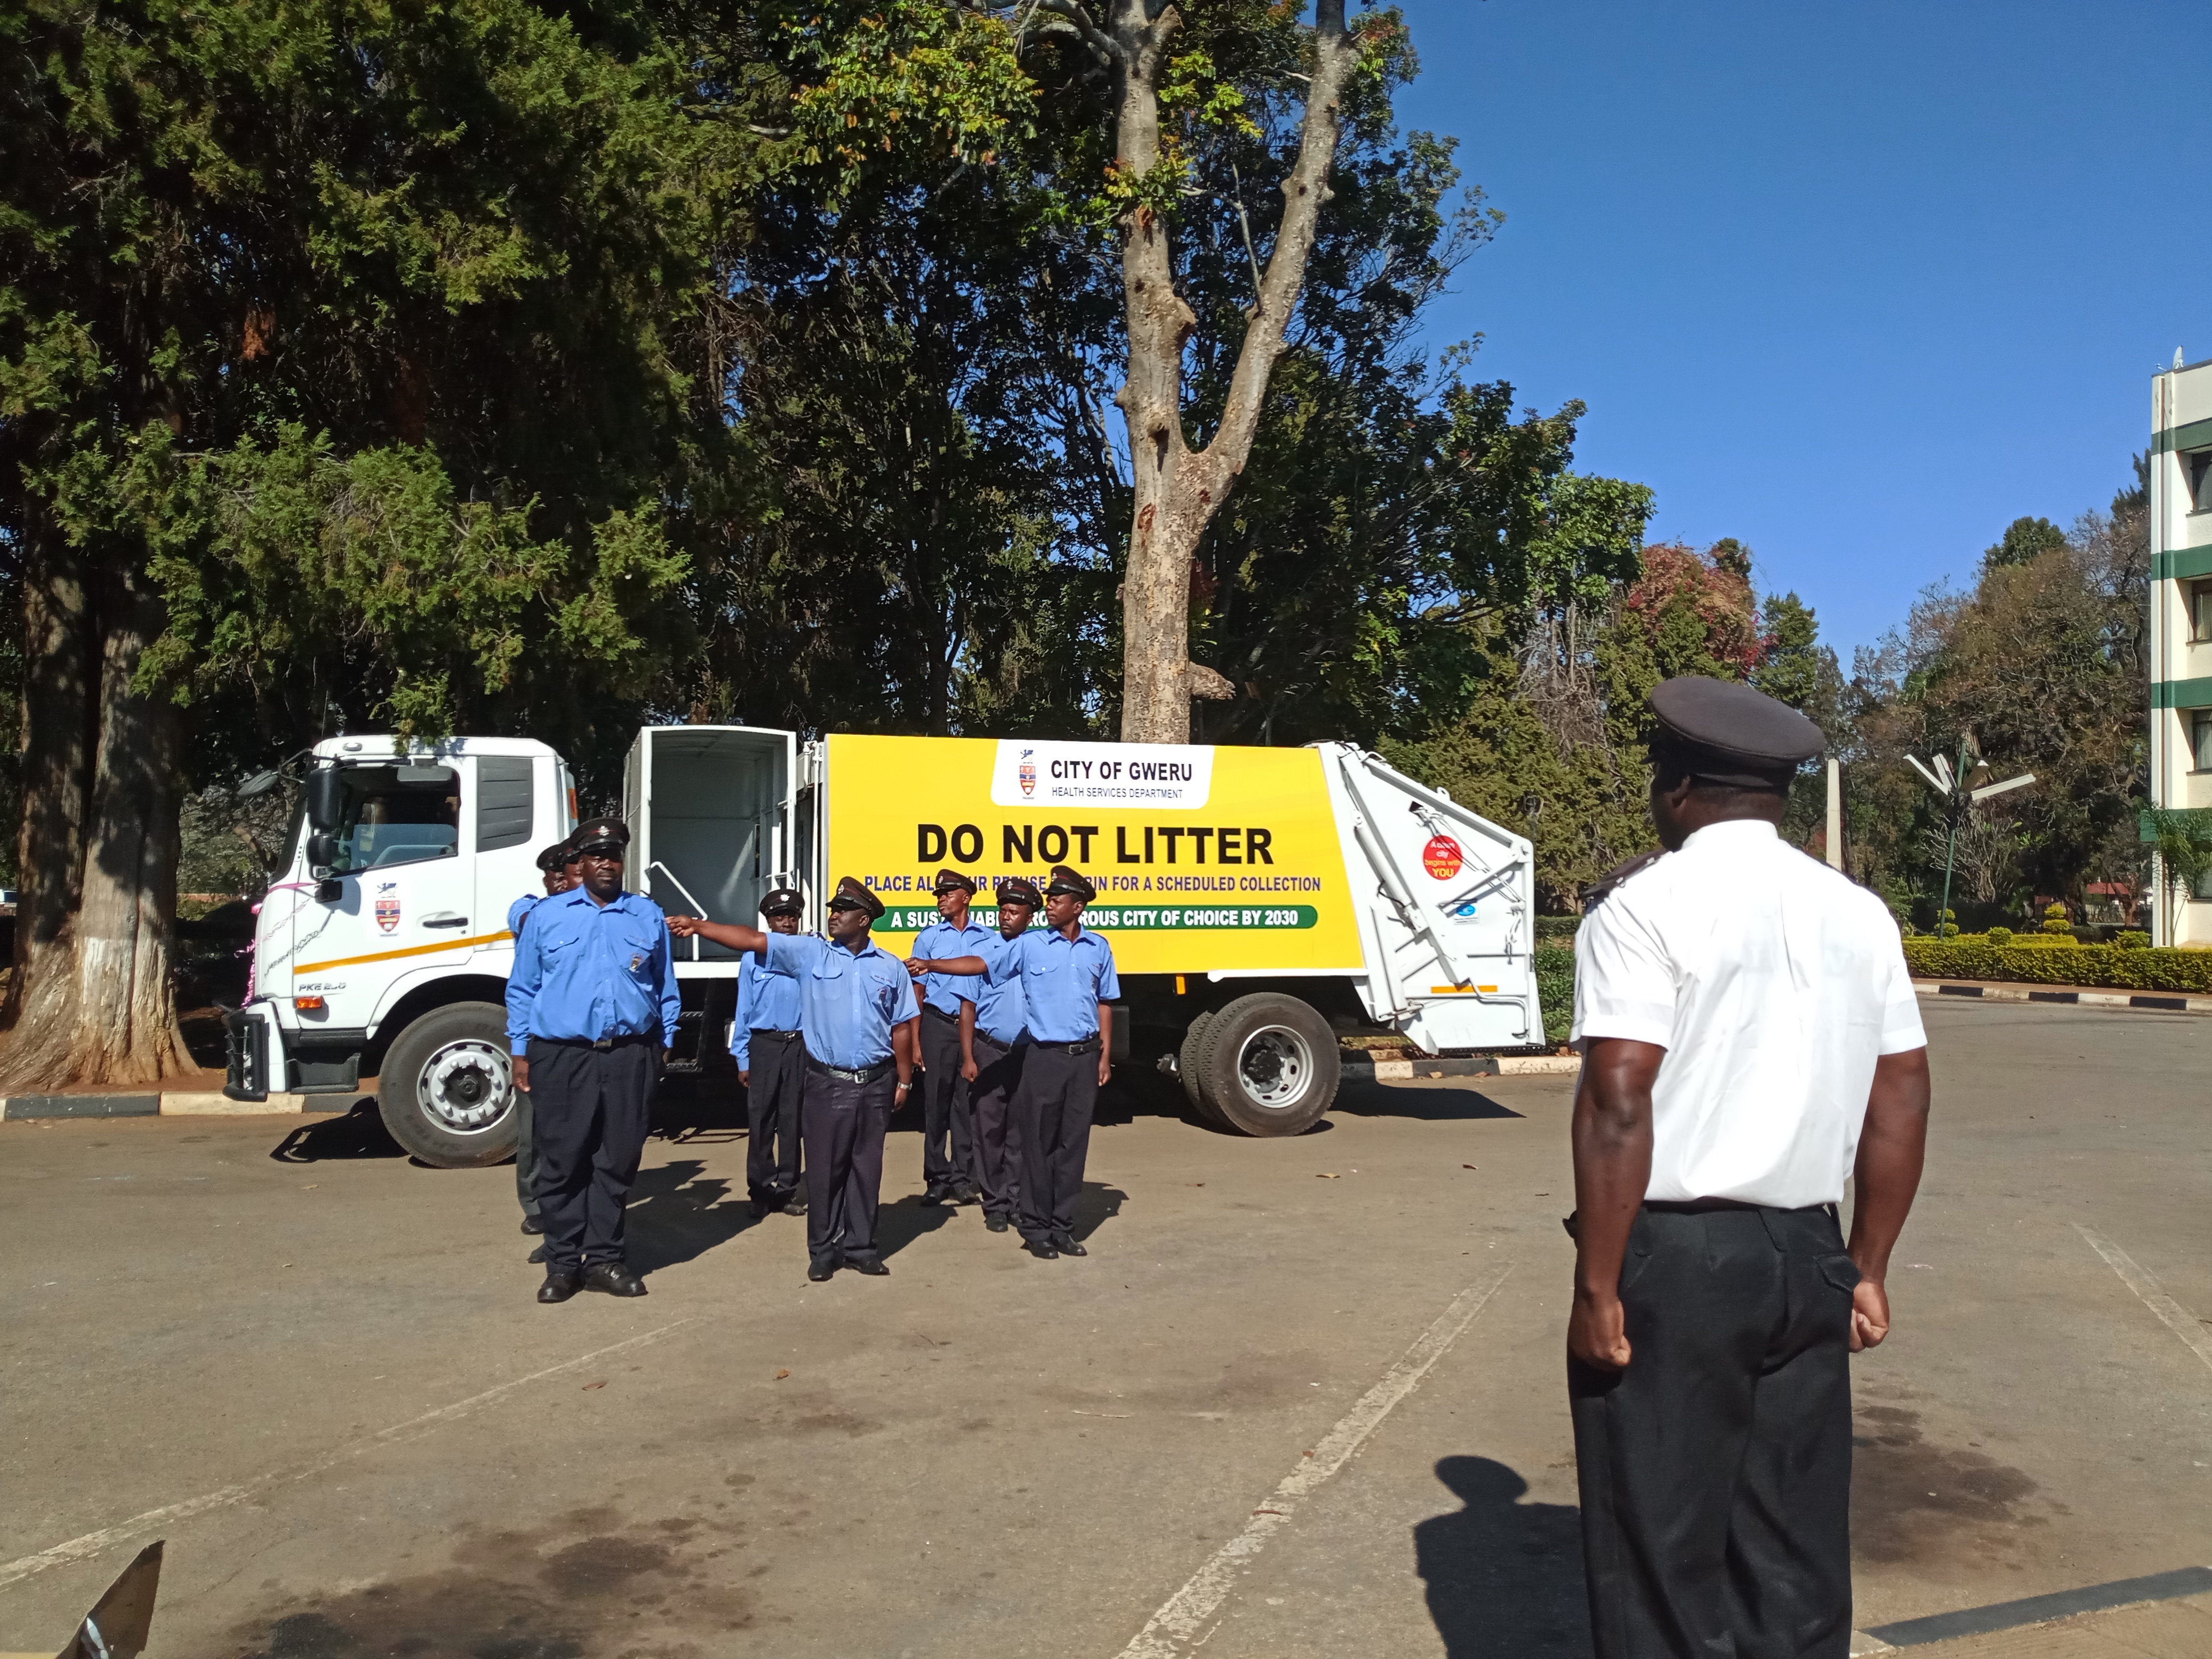 A new refuse truck for Gweru City Council